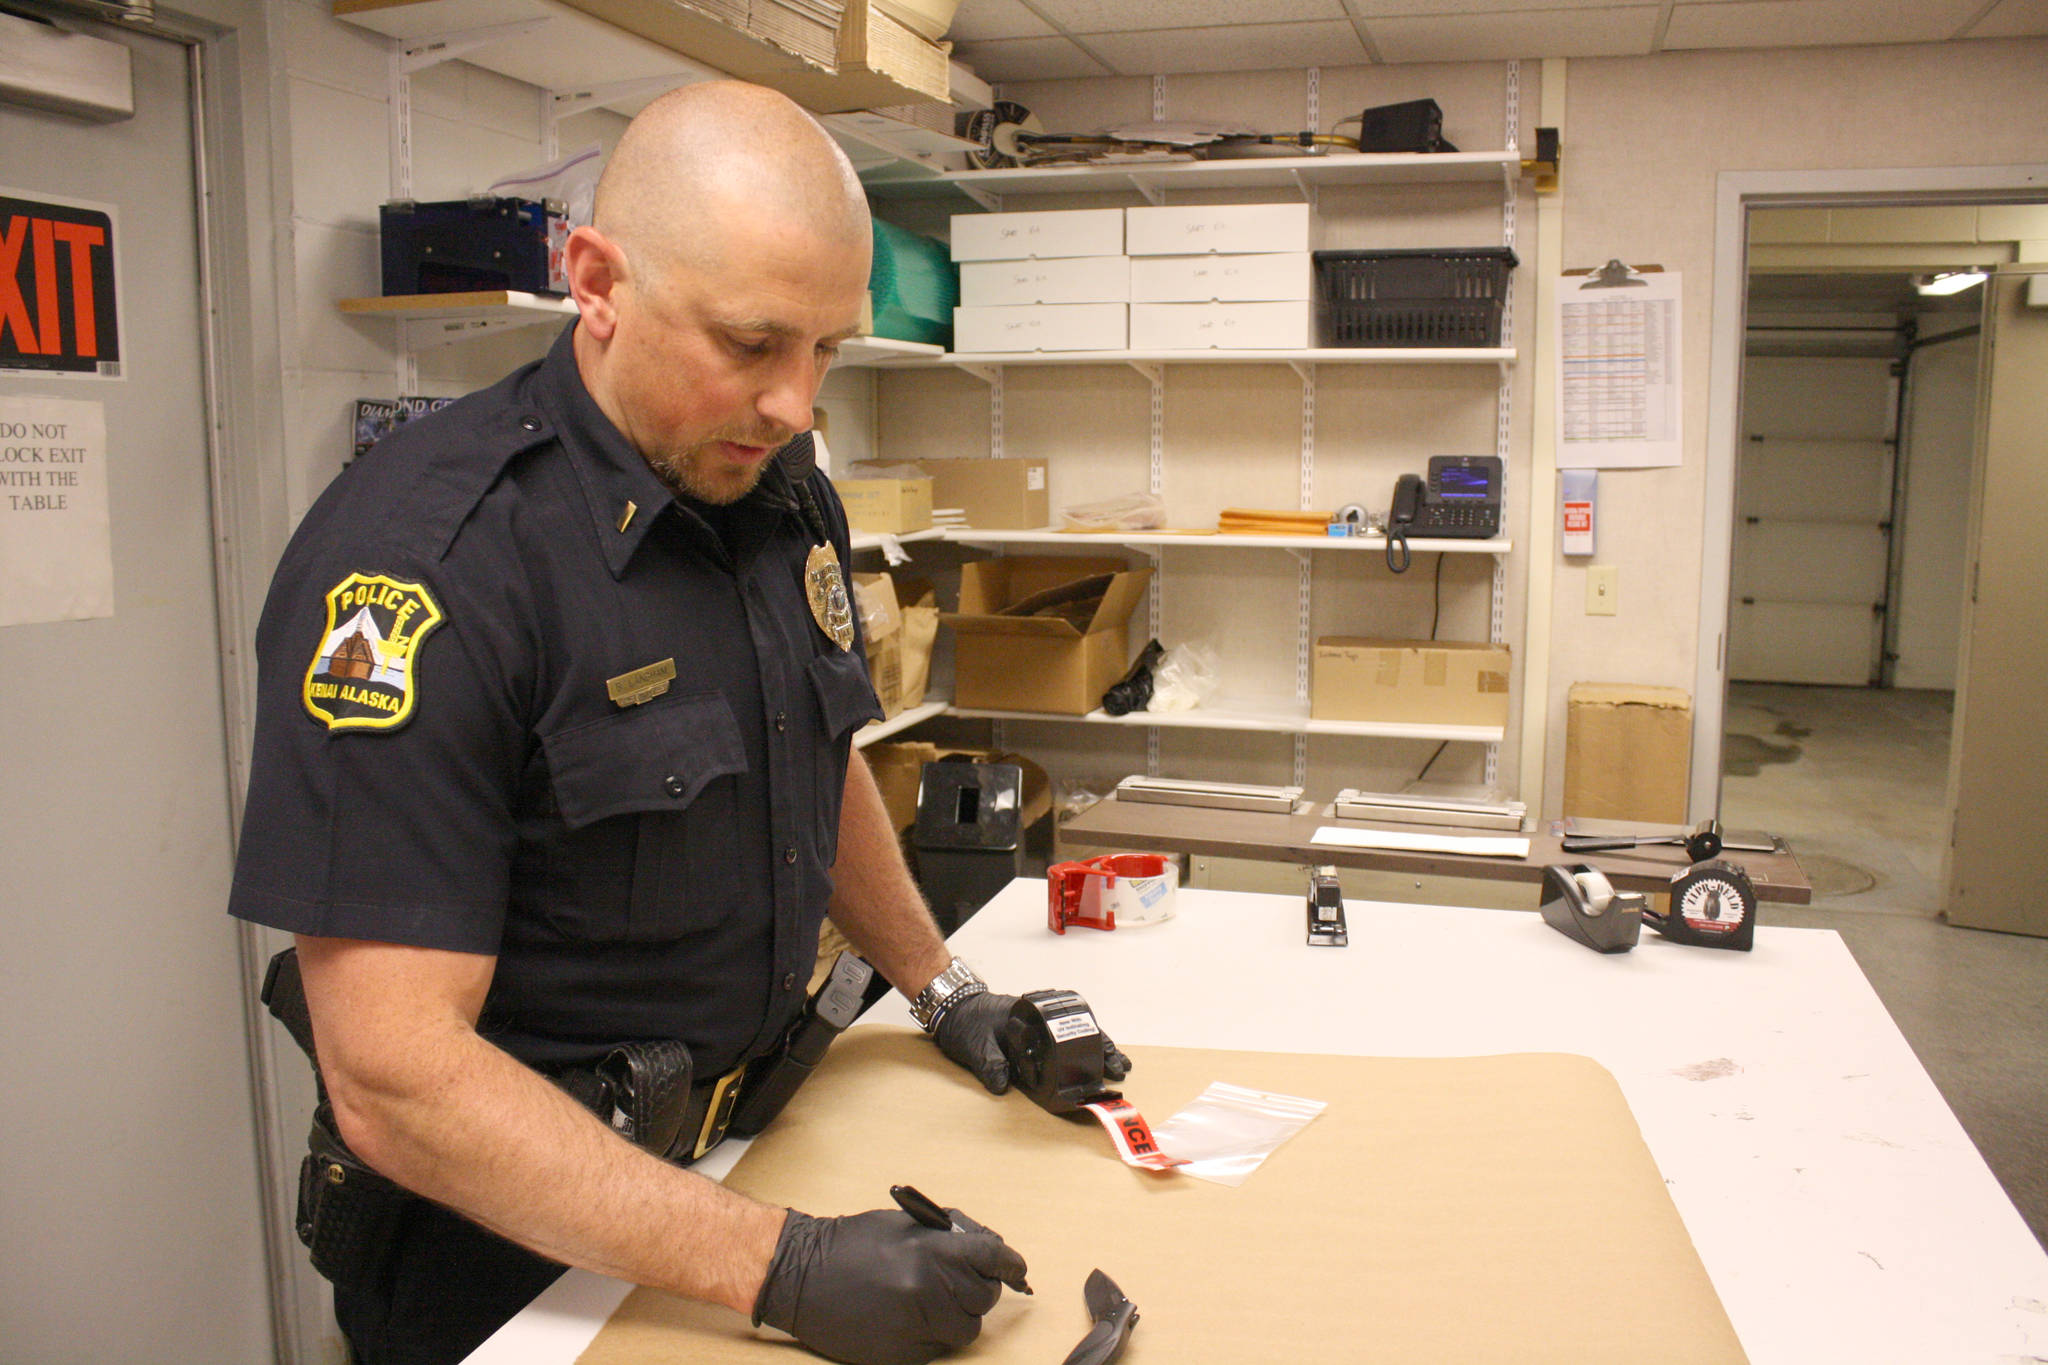 Kenai Police Lt. Ben Langham demonstrates how police prepare evidence for storage at Kenai Police Department headquarters on Thursday. (Photo by Erin Thompson/Peninsula Clarion)